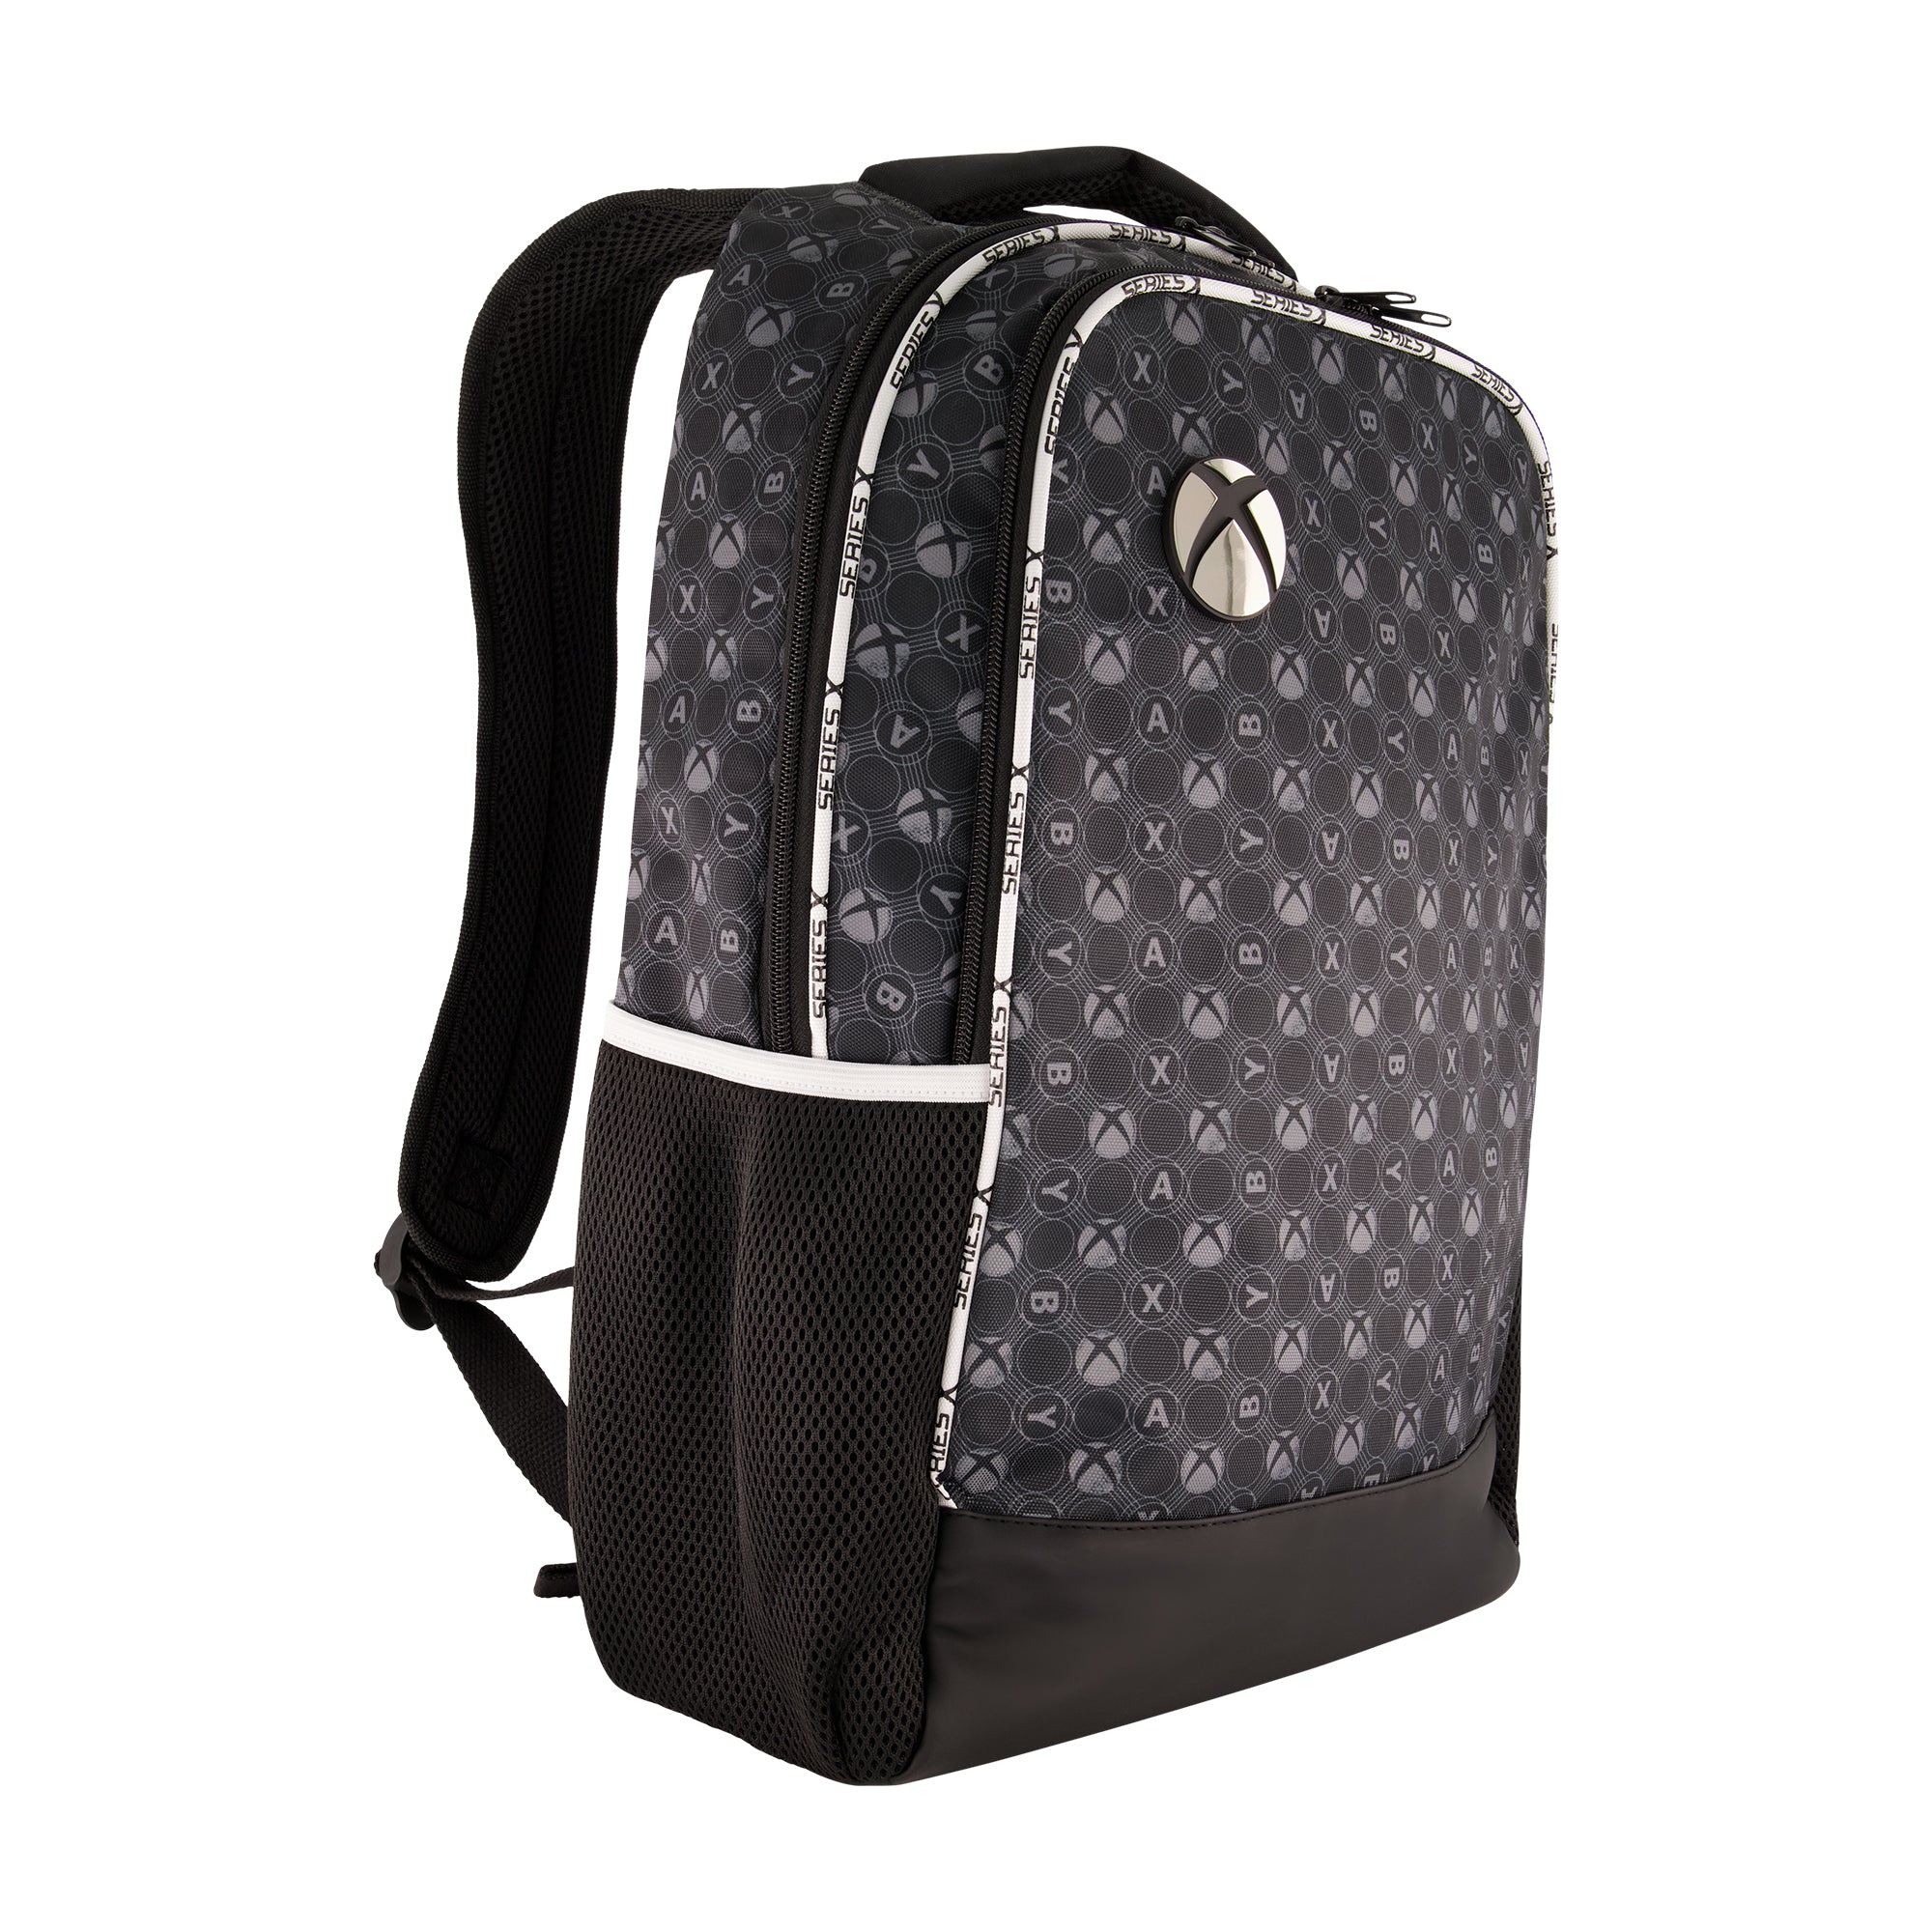 LV Leather Laptop Backpack For Men And Women | Laptop Backpack | Office Backpack | College Backpack 